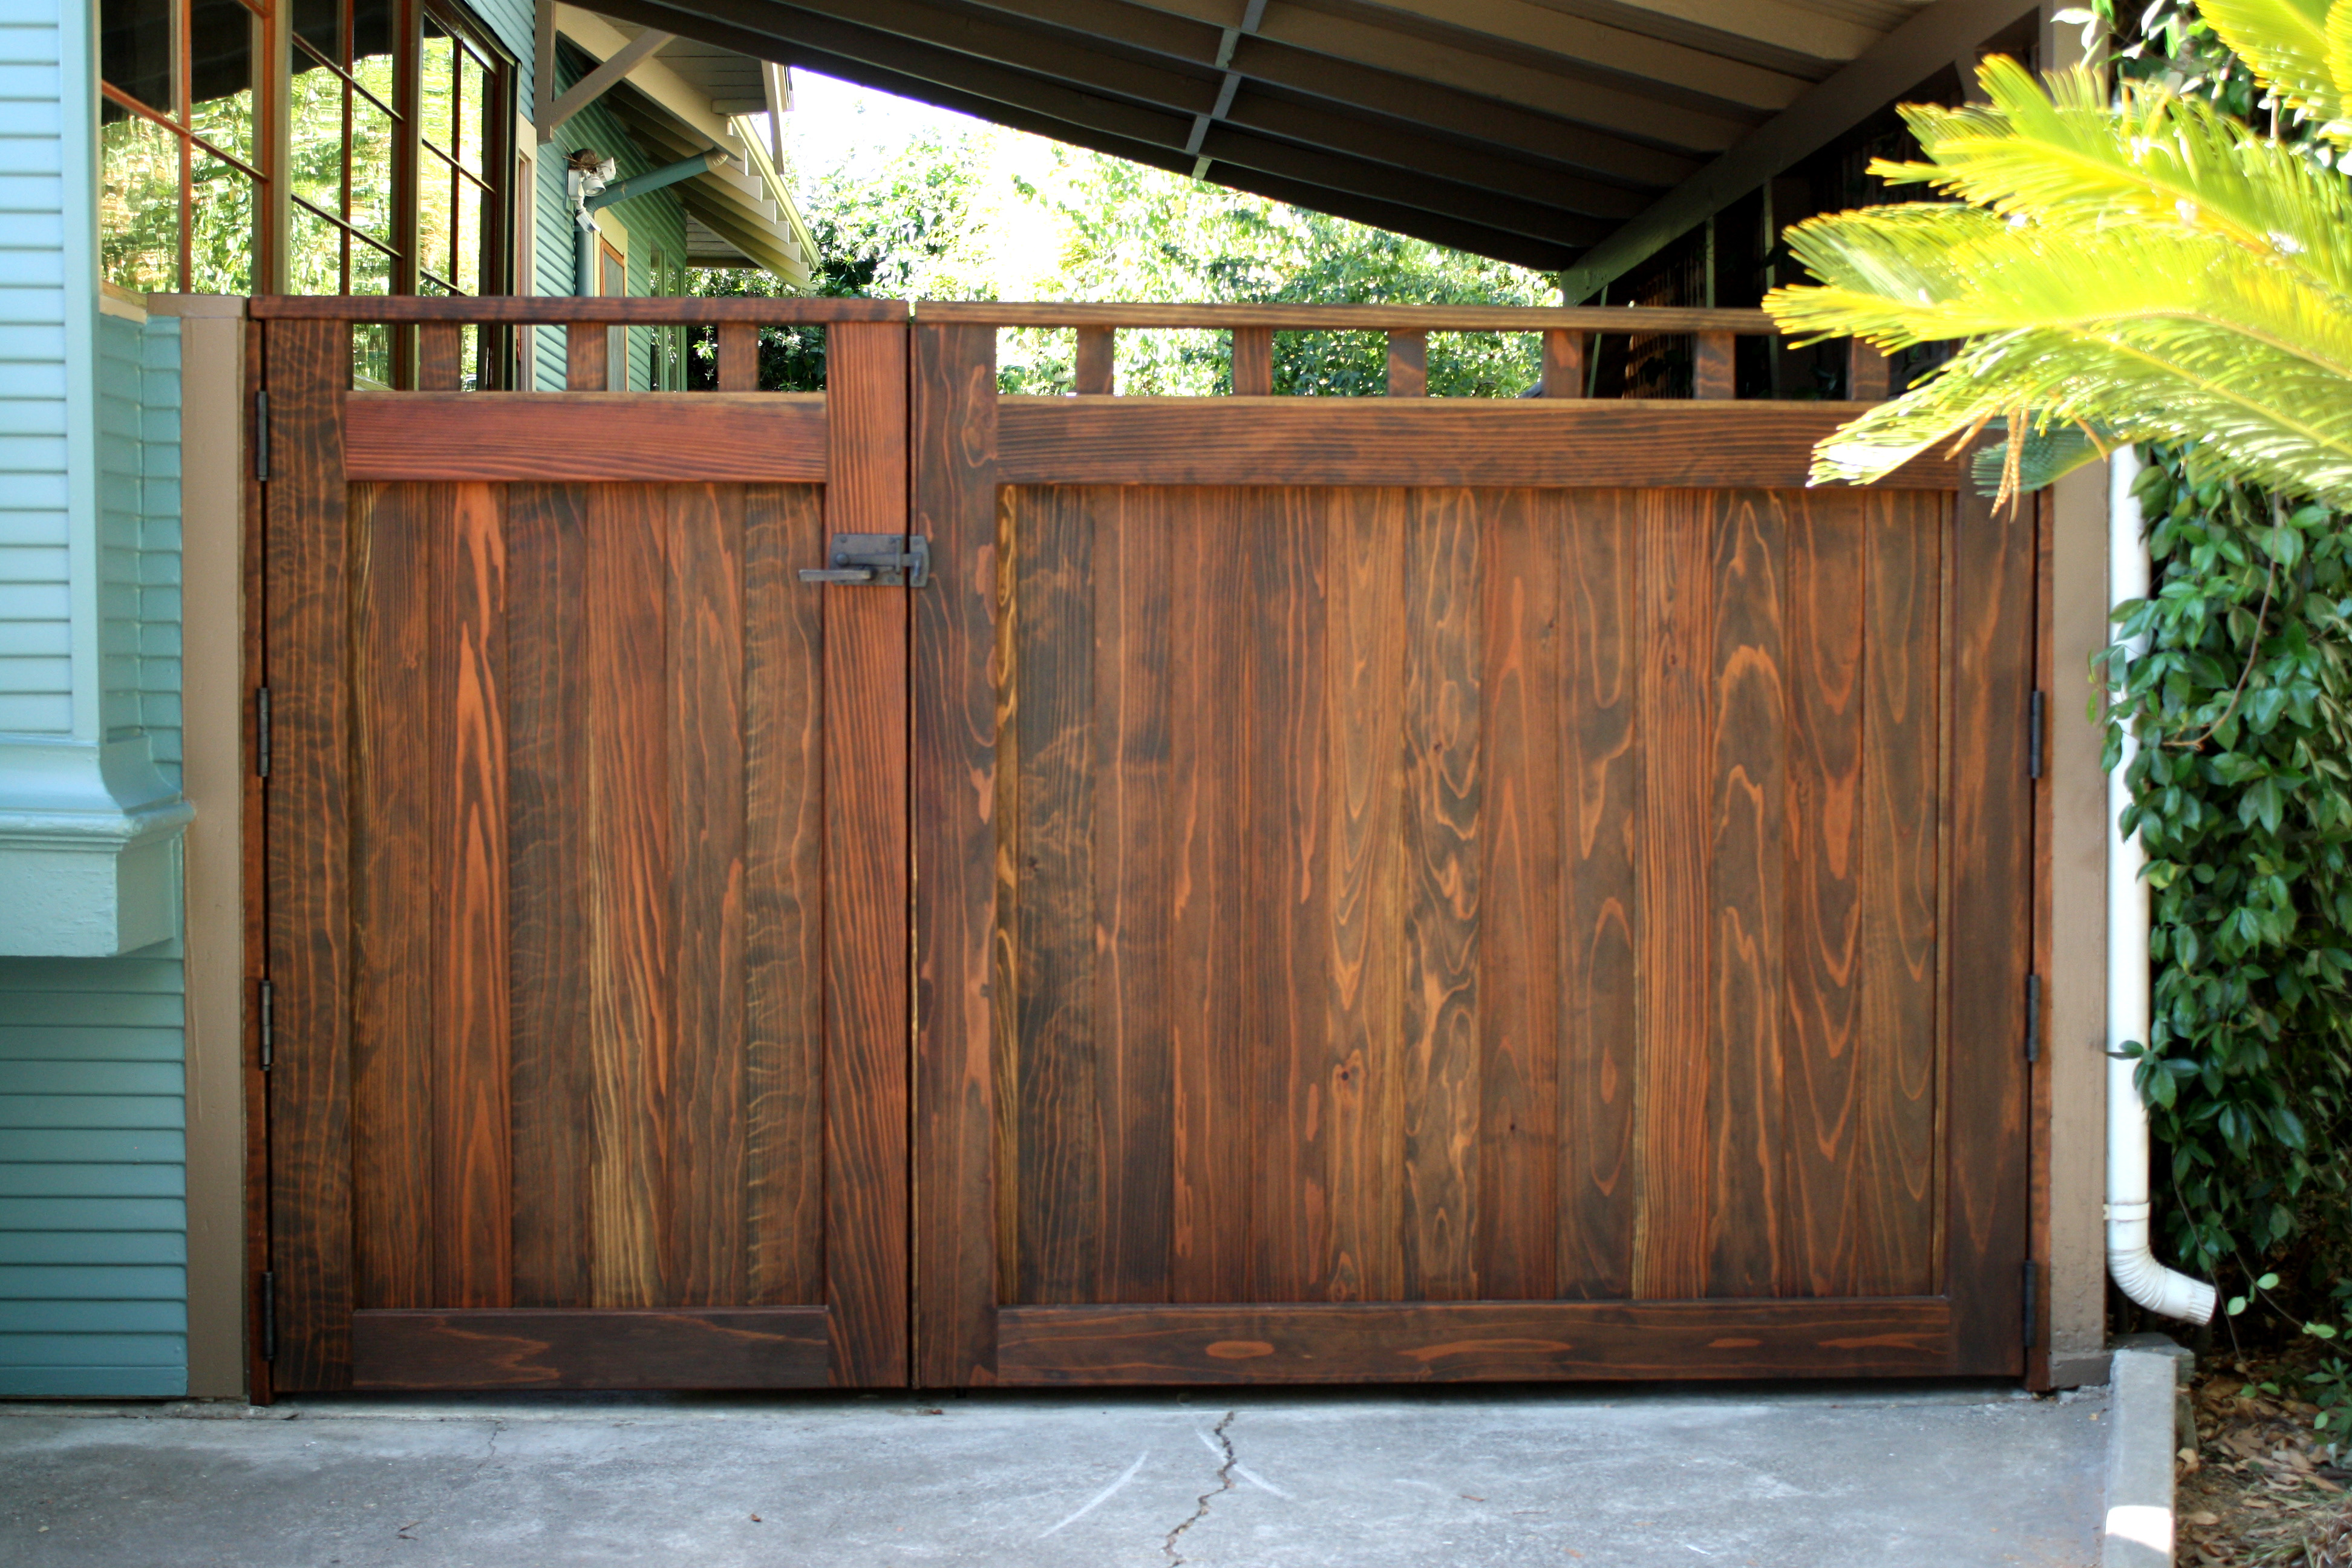 double-wood-driveway-courtyard-gate-in-craftsman-style.jpg